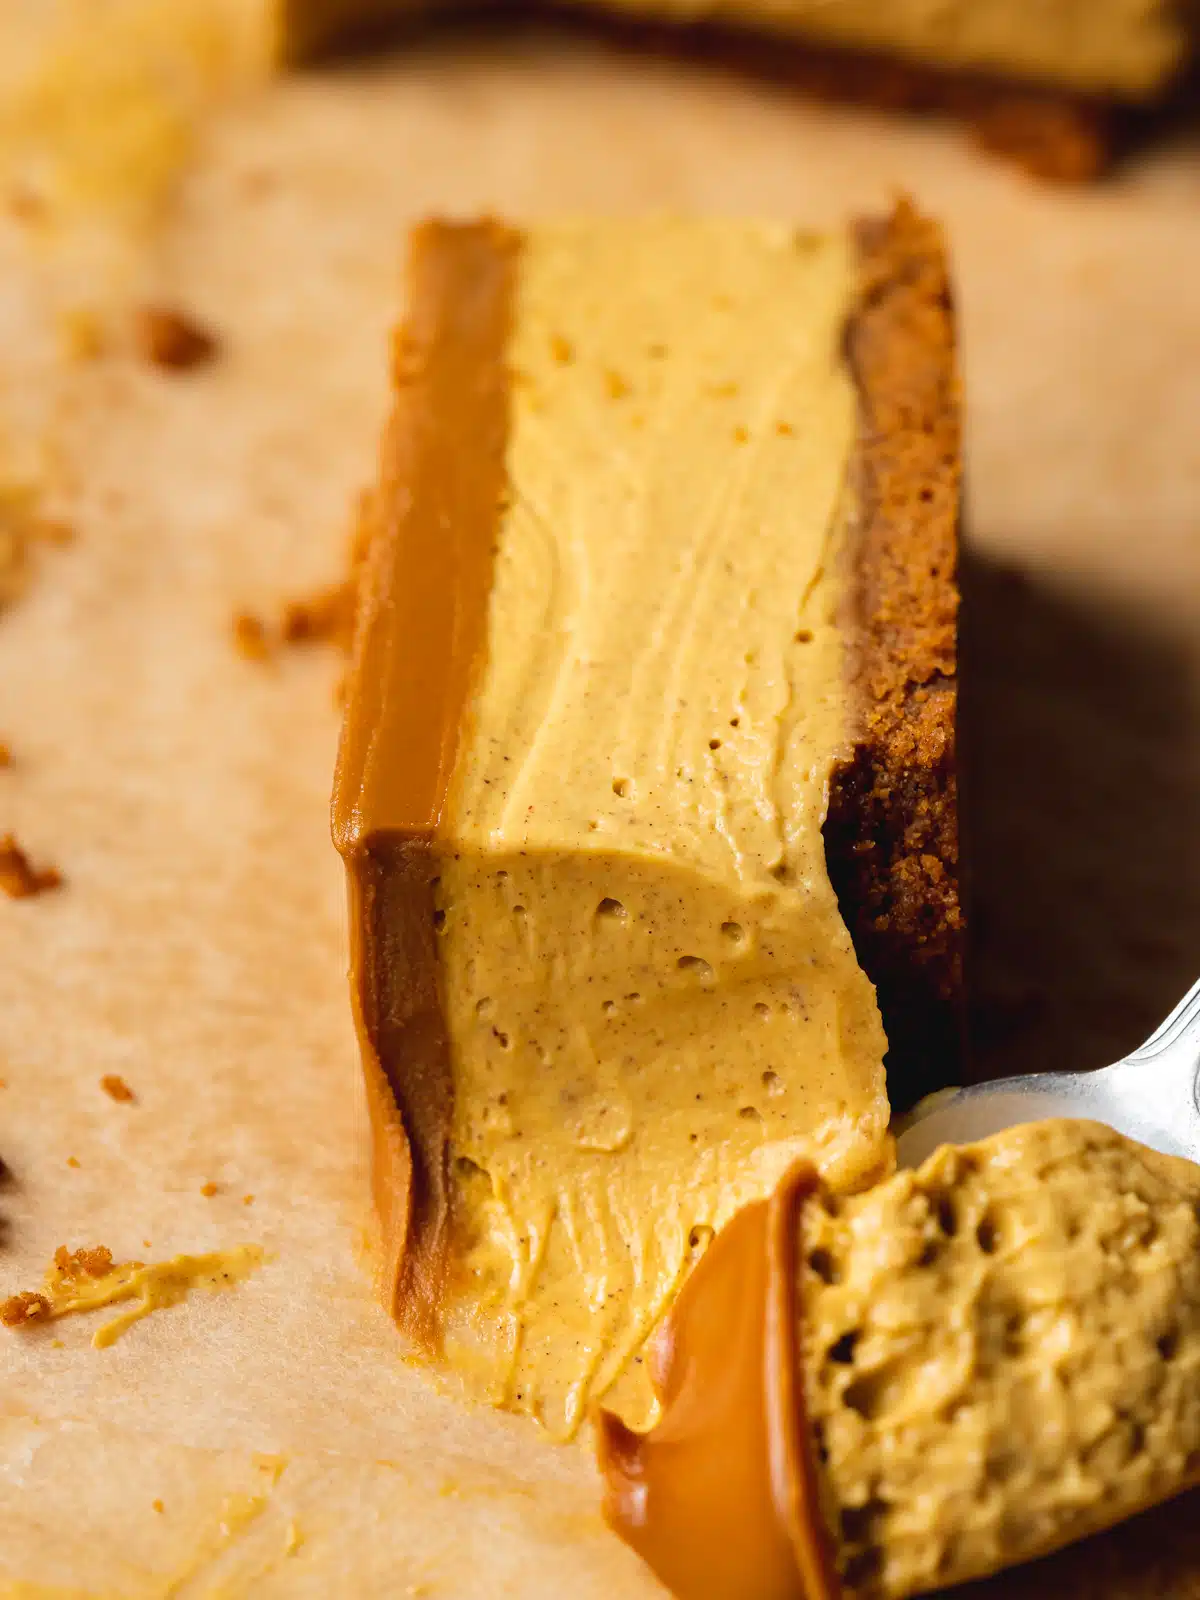 Featuring a velvety, dreamy cheesecake that melts in your mouth, infused with the warm embrace of pumpkin spice, all cradled within an irresistible Biscoff cookie crust, these Vegan Pumpkin Cheesecake Bars are the easy, no-bake, nut-free treat you’ve been waiting for. Made with just 10 simple ingredients in only a few simple steps, these make-ahead biscoff crust cheesecake bars are about to become your favorite new way to celebrate the season.